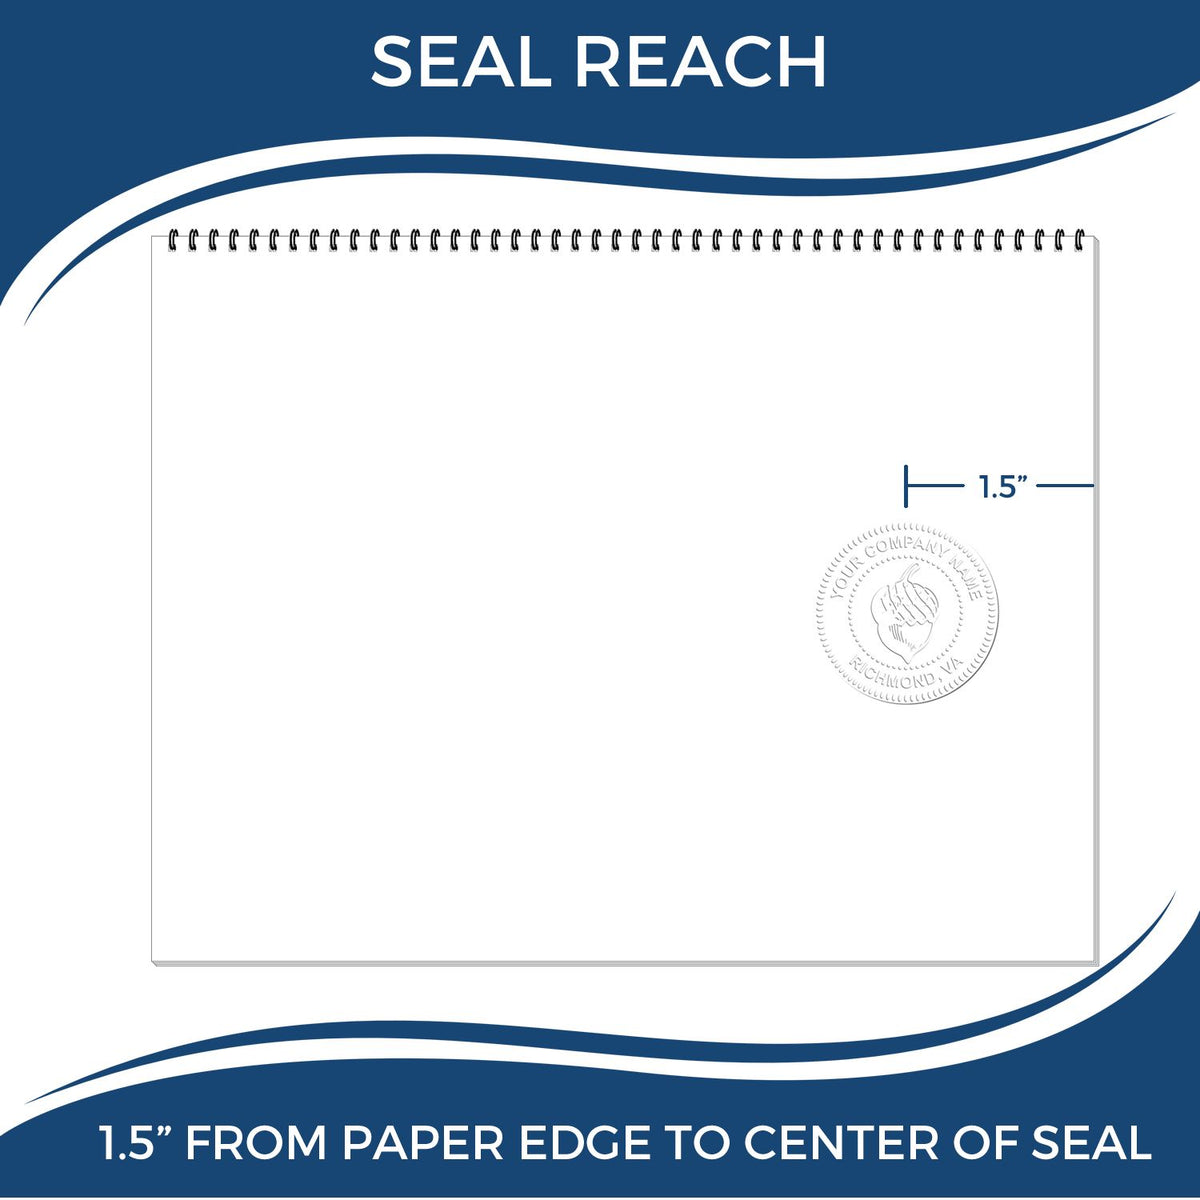 An infographic showing the seal reach which is represented by a ruler and a miniature seal image of the Hybrid West Virginia Land Surveyor Seal